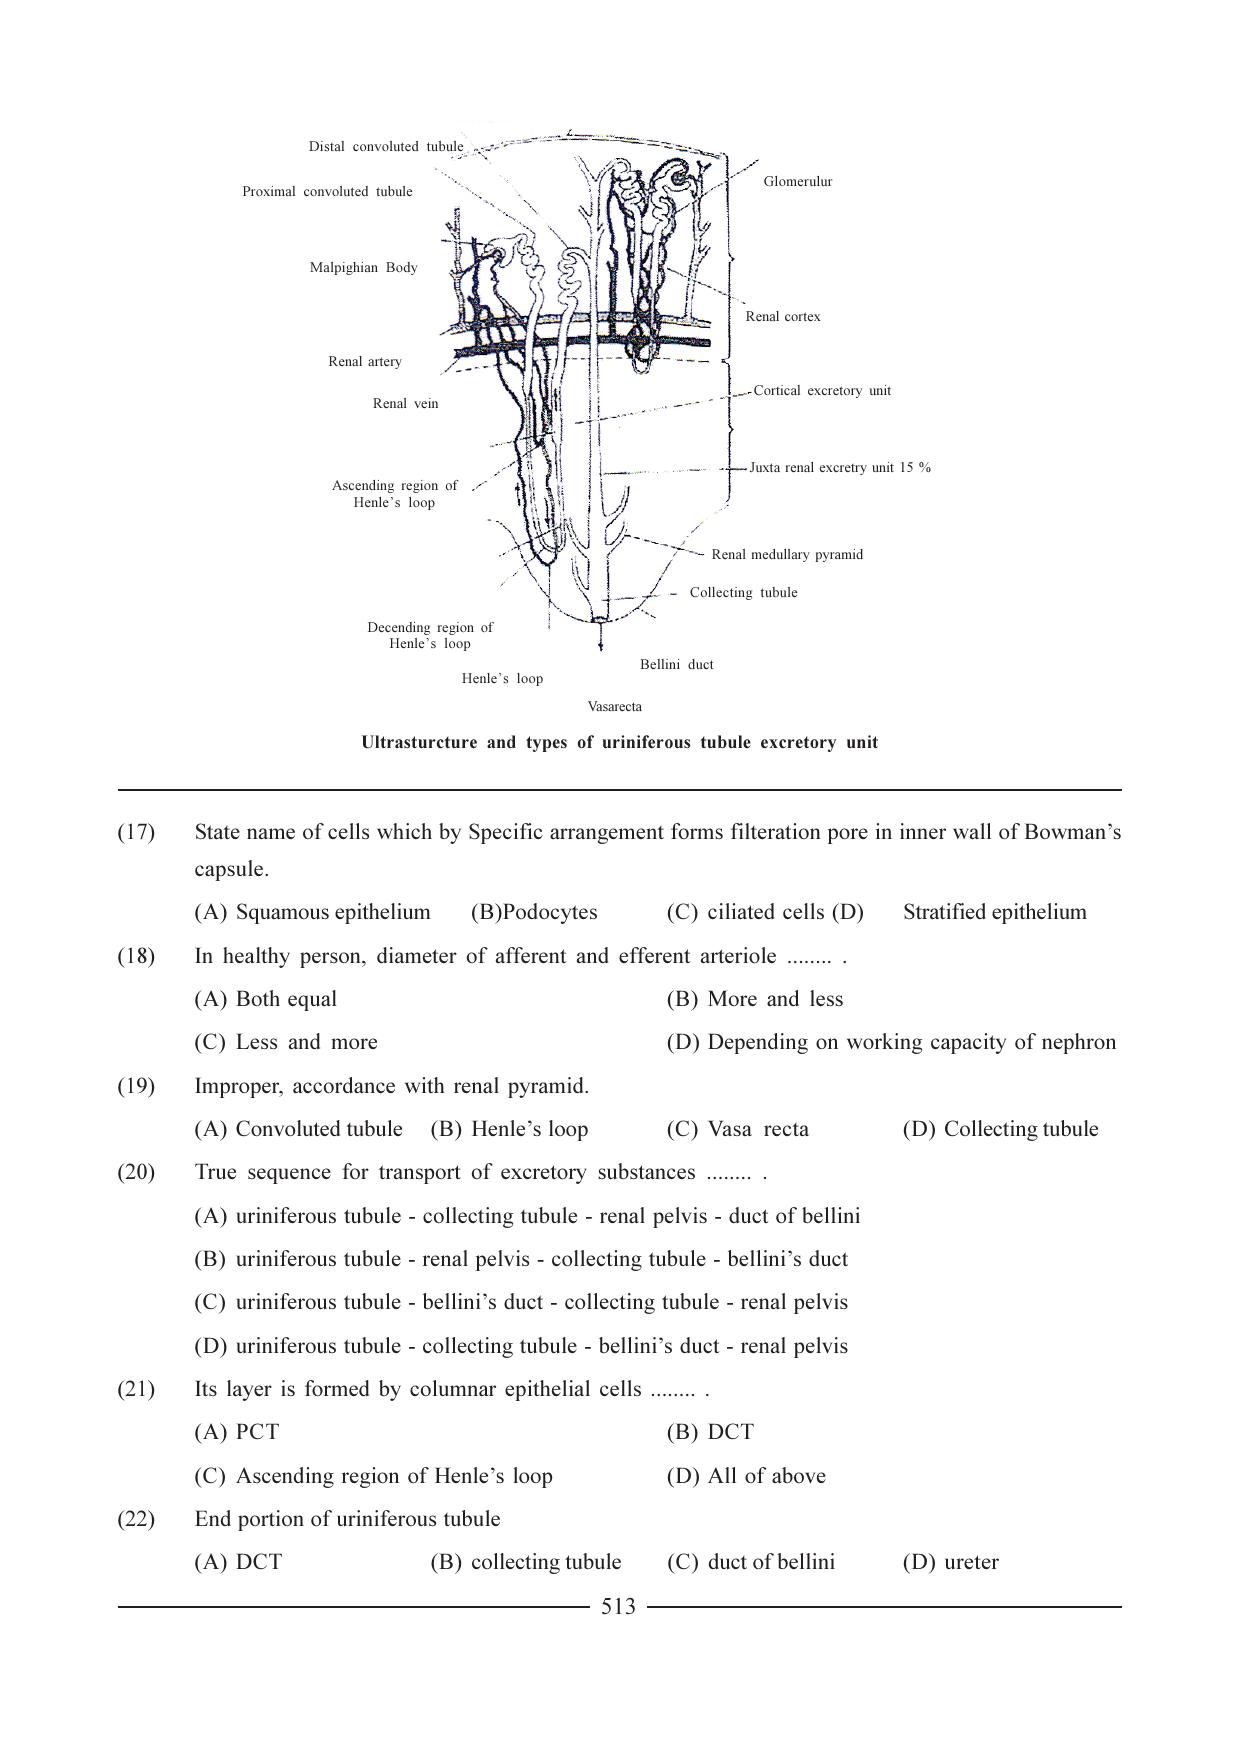 GSEB HSC Biology Question Paper (English Medium)- Chapter 25 - Page 5